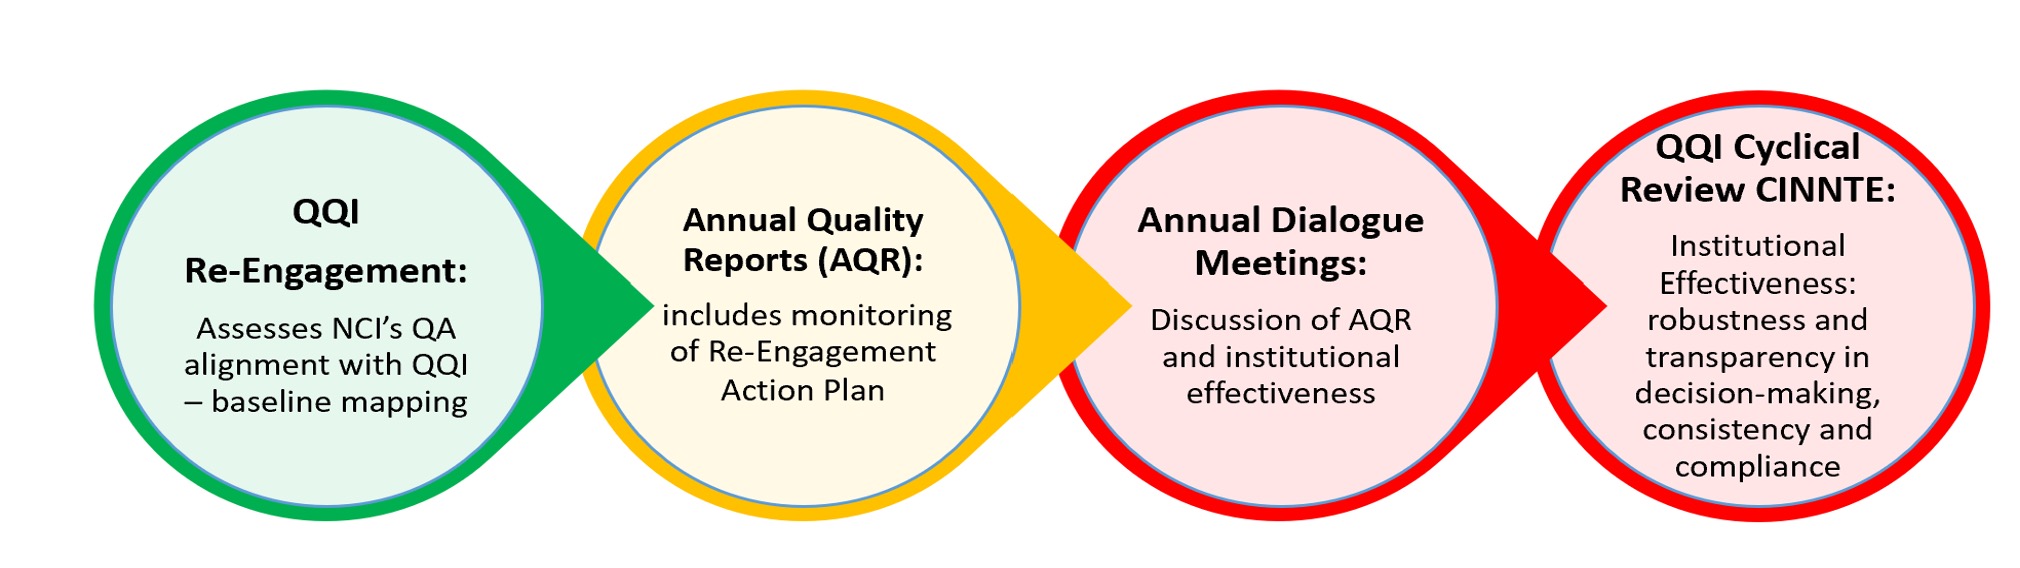 Infographic that highlights the 4 processes of how NCI works with QQI including QQI Re-Engagement, Annual Quality Reports, Annual Dialogue Meetings and QQI Cyclical Review